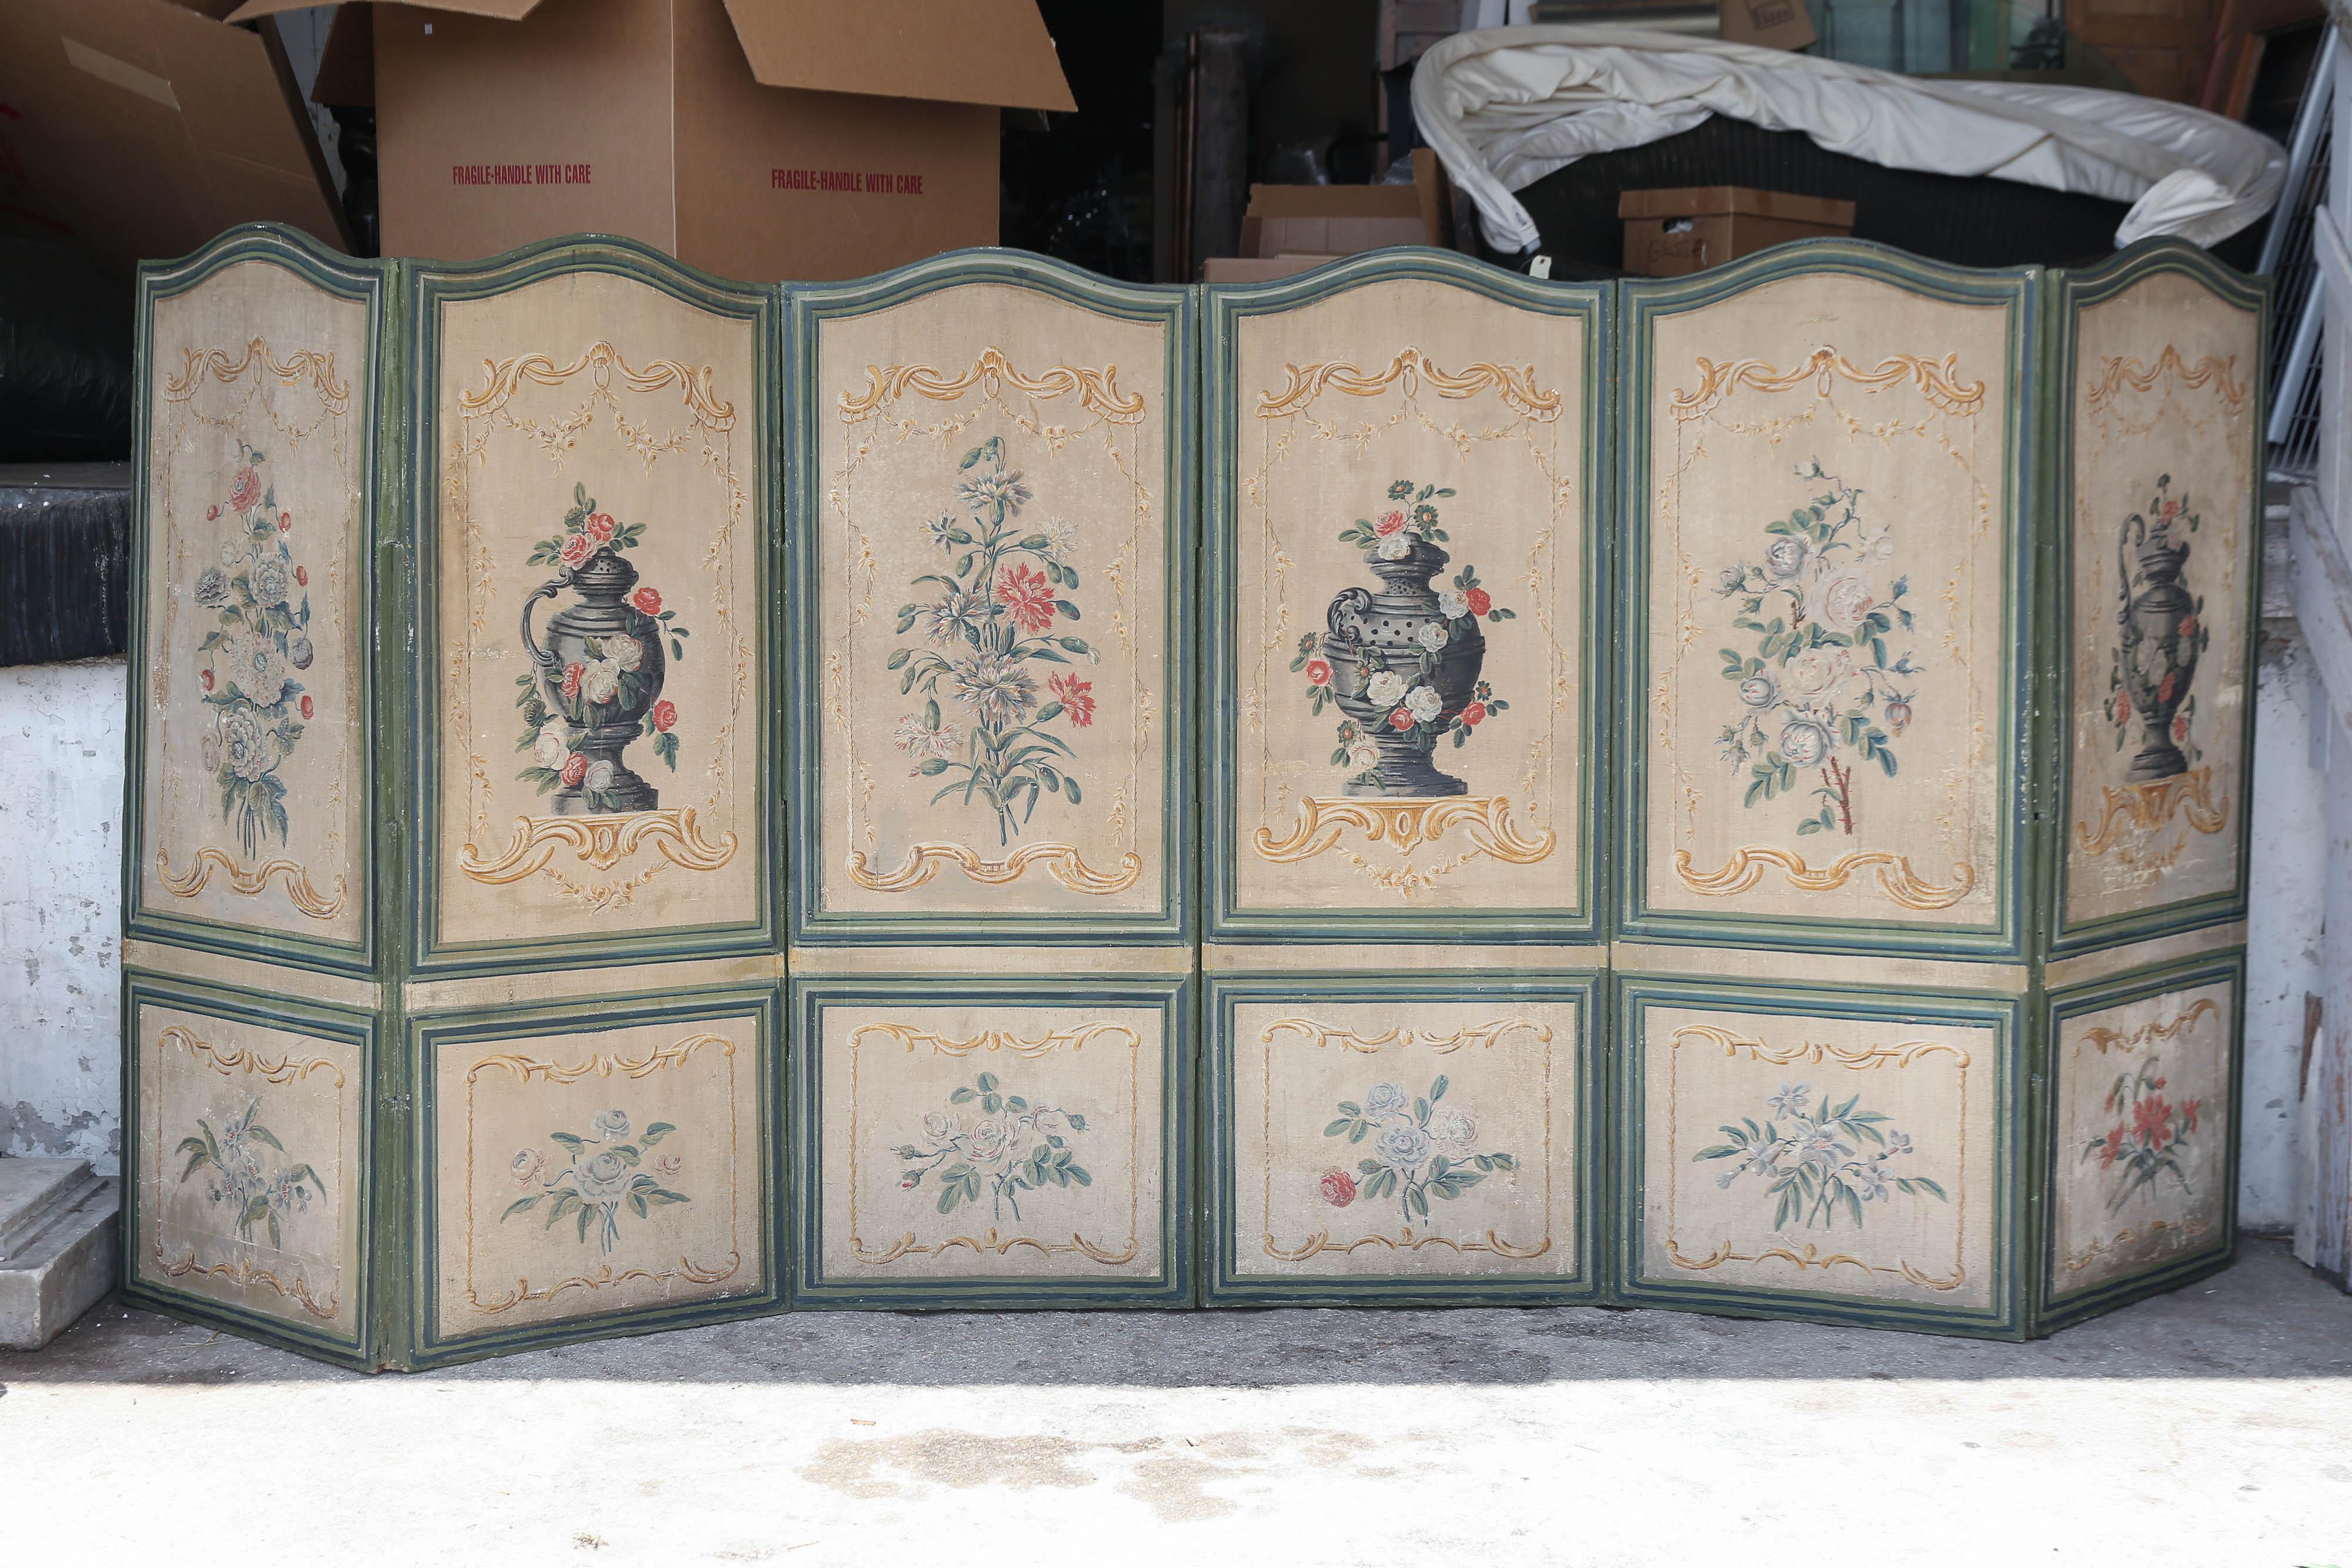 French 19th century painted canvas screen features alternating vase and floral decorations in a very pale palette.

Each panel is framed and painted a blue-green.

Back of screen is painted in monochromatic tones of blue.

